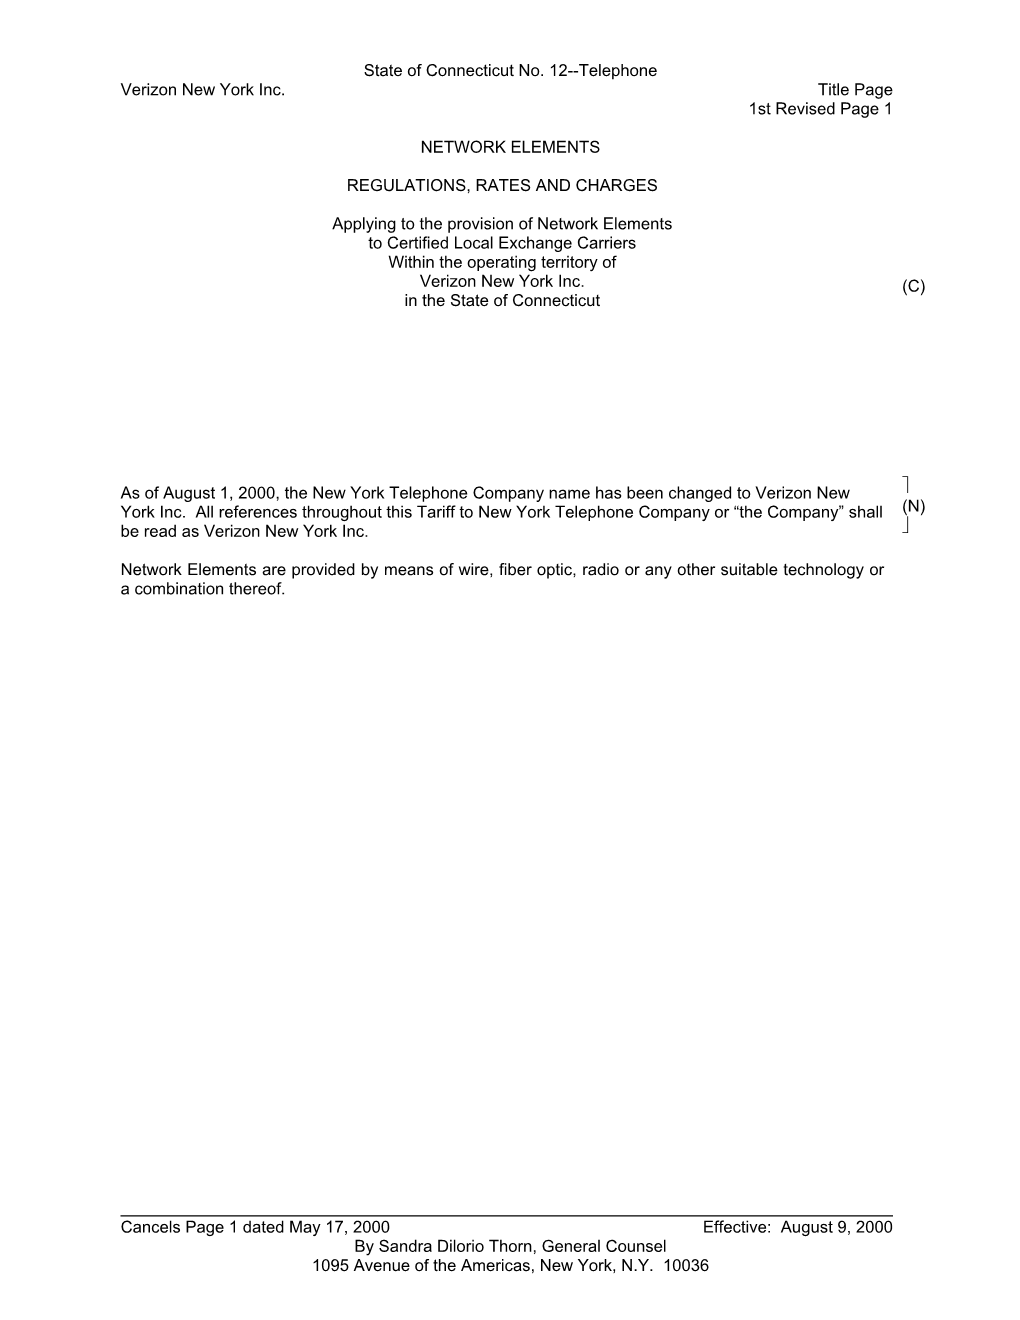 State of Connecticut No. 12--Telephone Verizon New York Inc. Title Page 1St Revised Page 1 NETWORK ELEMENTS REGULATIONS, RATES A